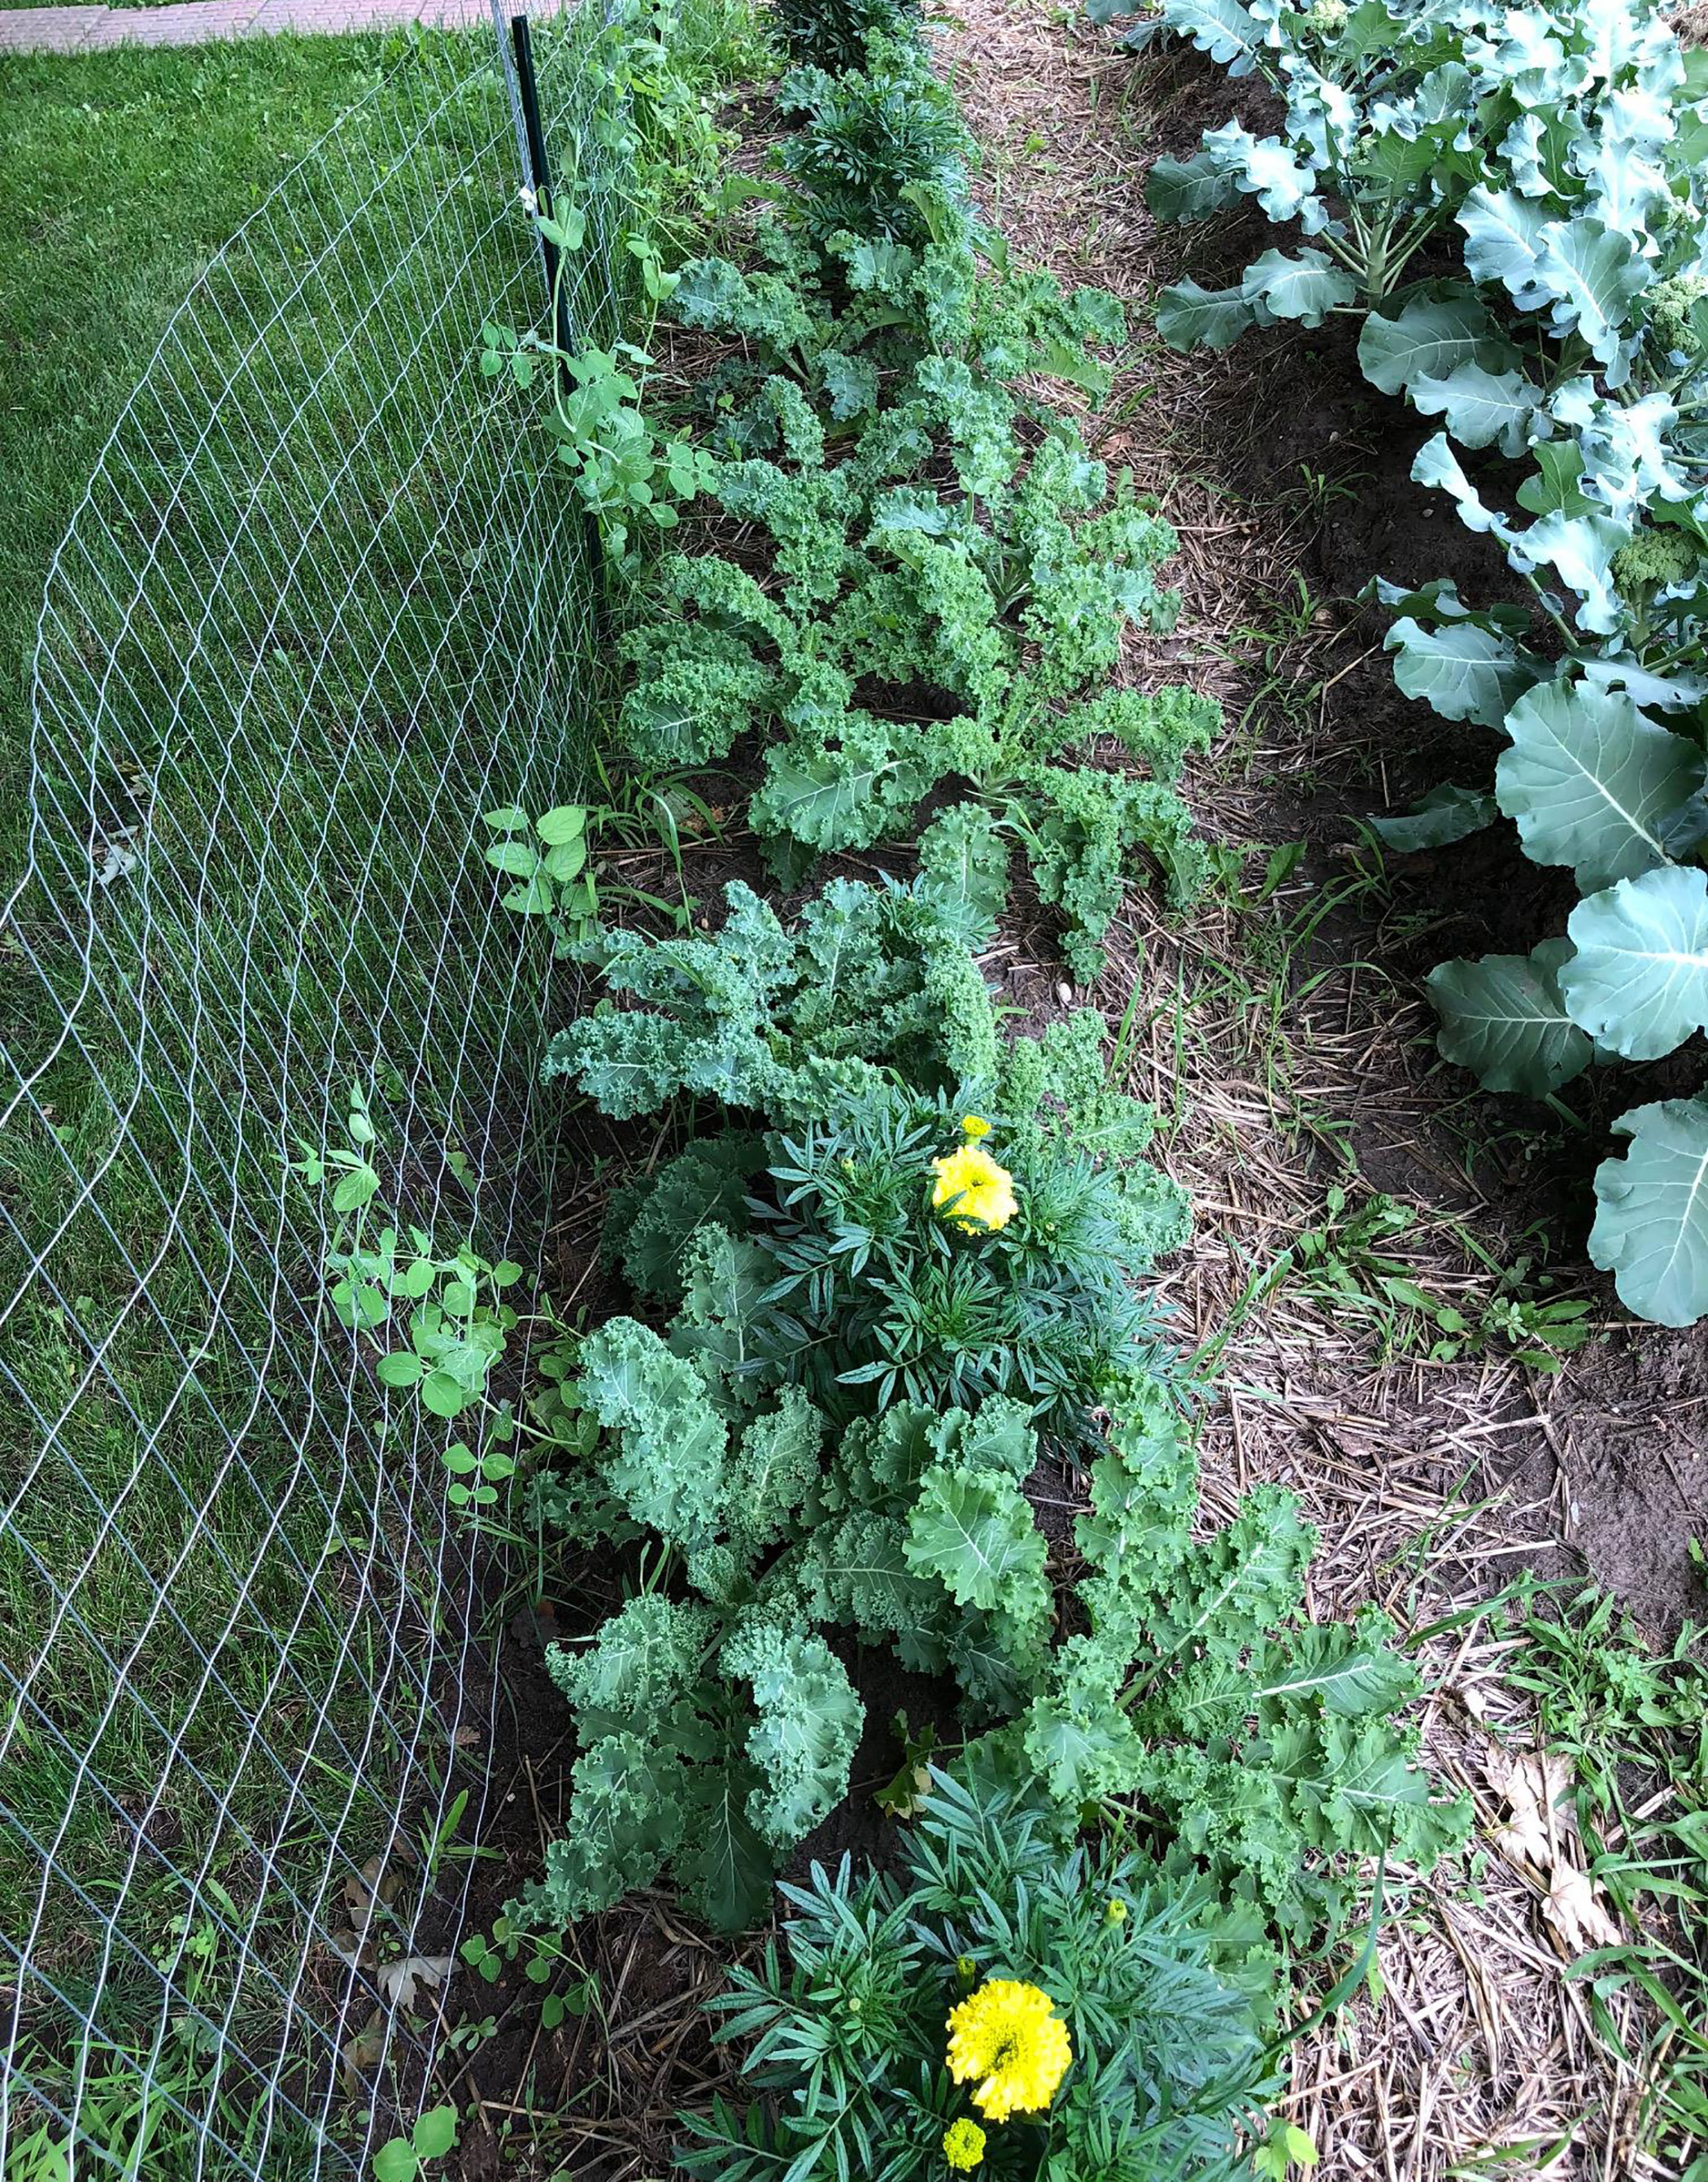 A companion planting of kale, pole beans, and marigolds in a small garden plot.